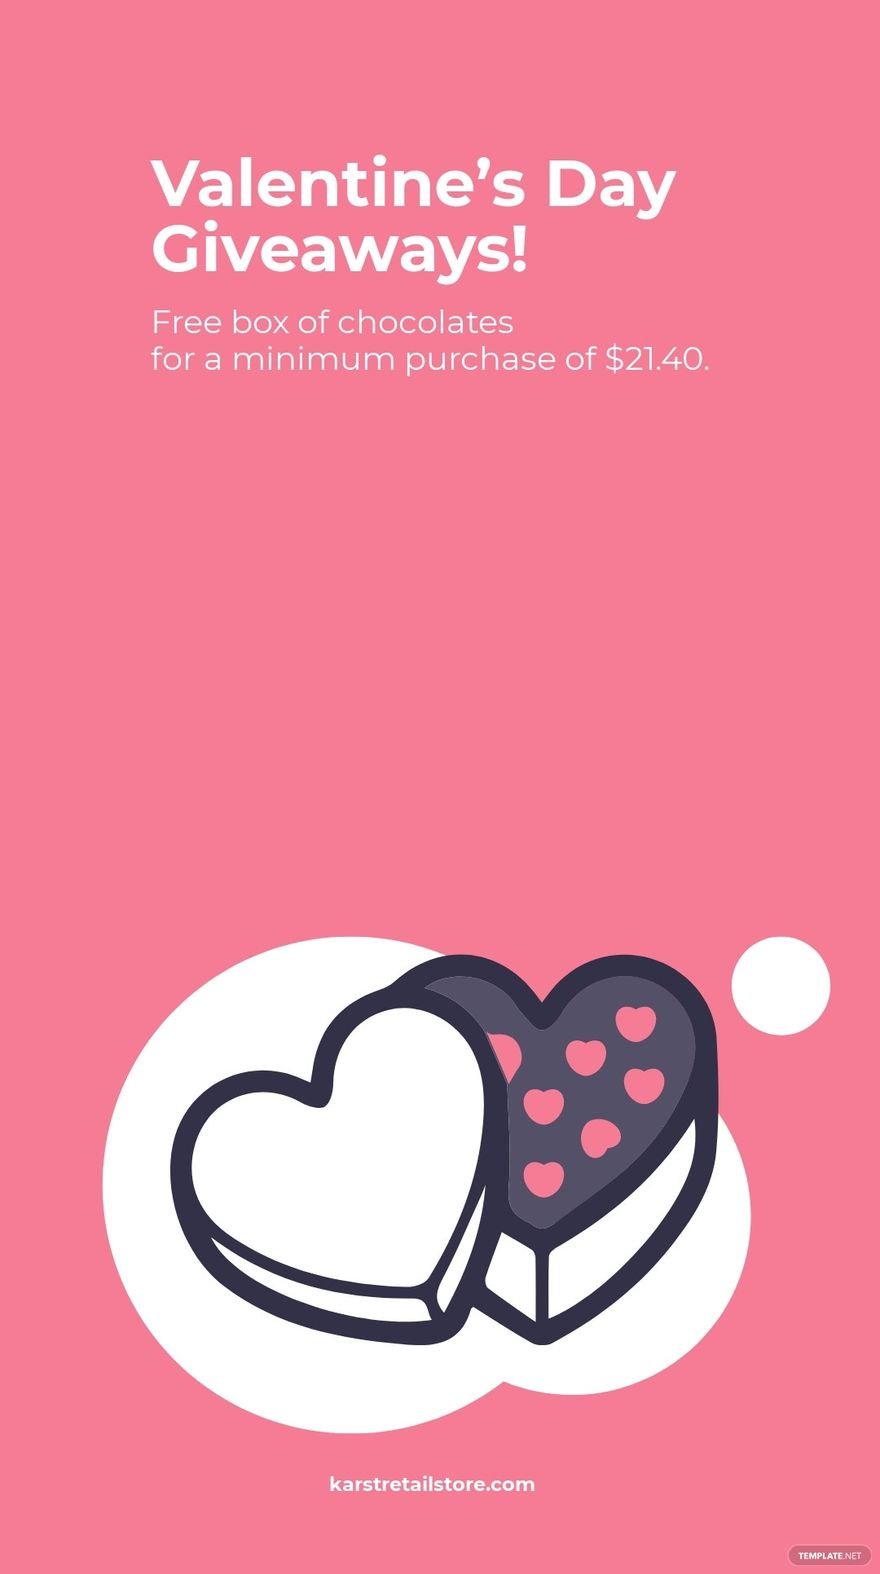 Valentine's Day Giveaway Snapchat Geofilter Template